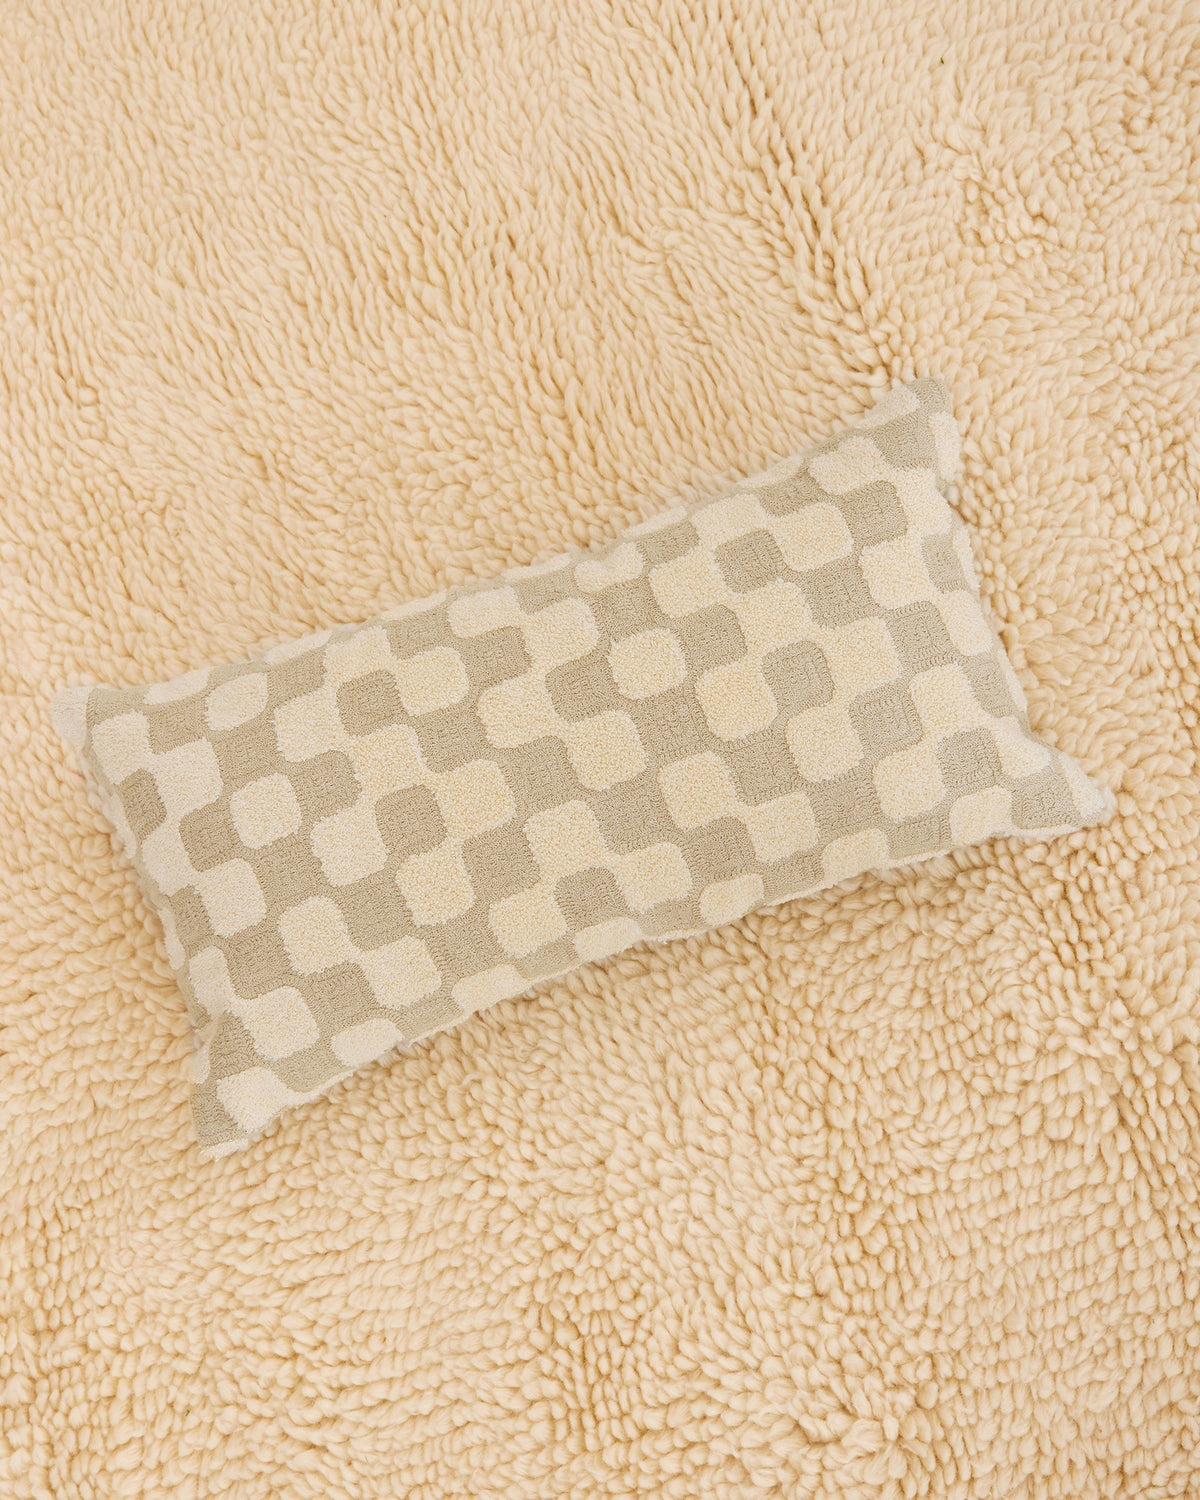 Dusen Dusen Net Pillow. 100% cotton embroidery and tufting bolster pillow in beige and cream Net pattern. Non-embroidered natural canvas back with a zipper opening. Available as 12" x 22". Spot clean only. Made in India.